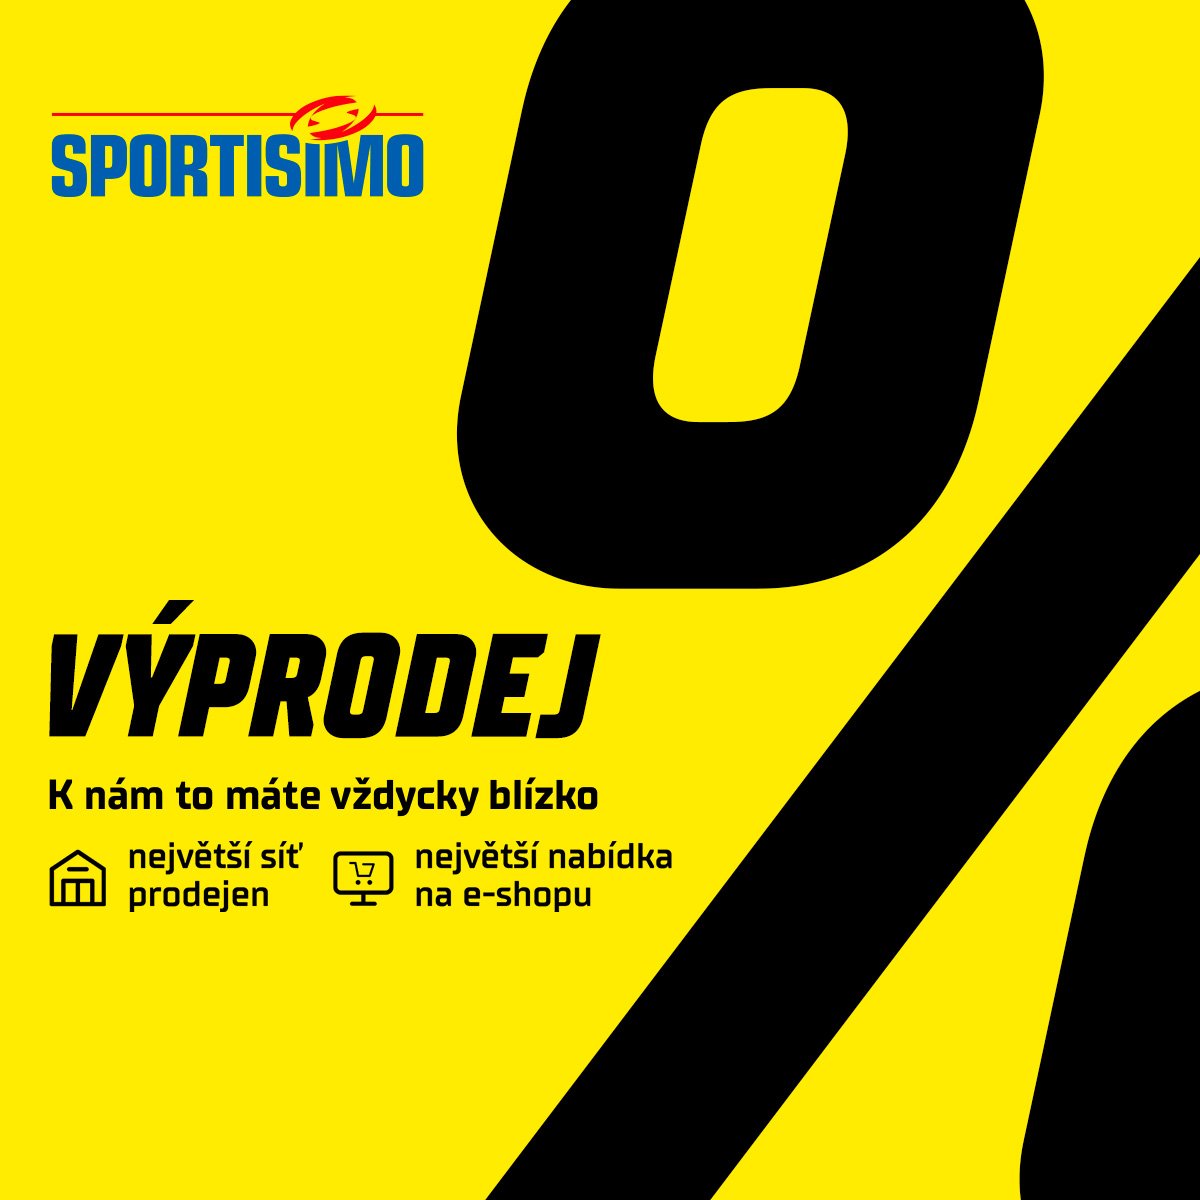 Summer sale at Sportisimo